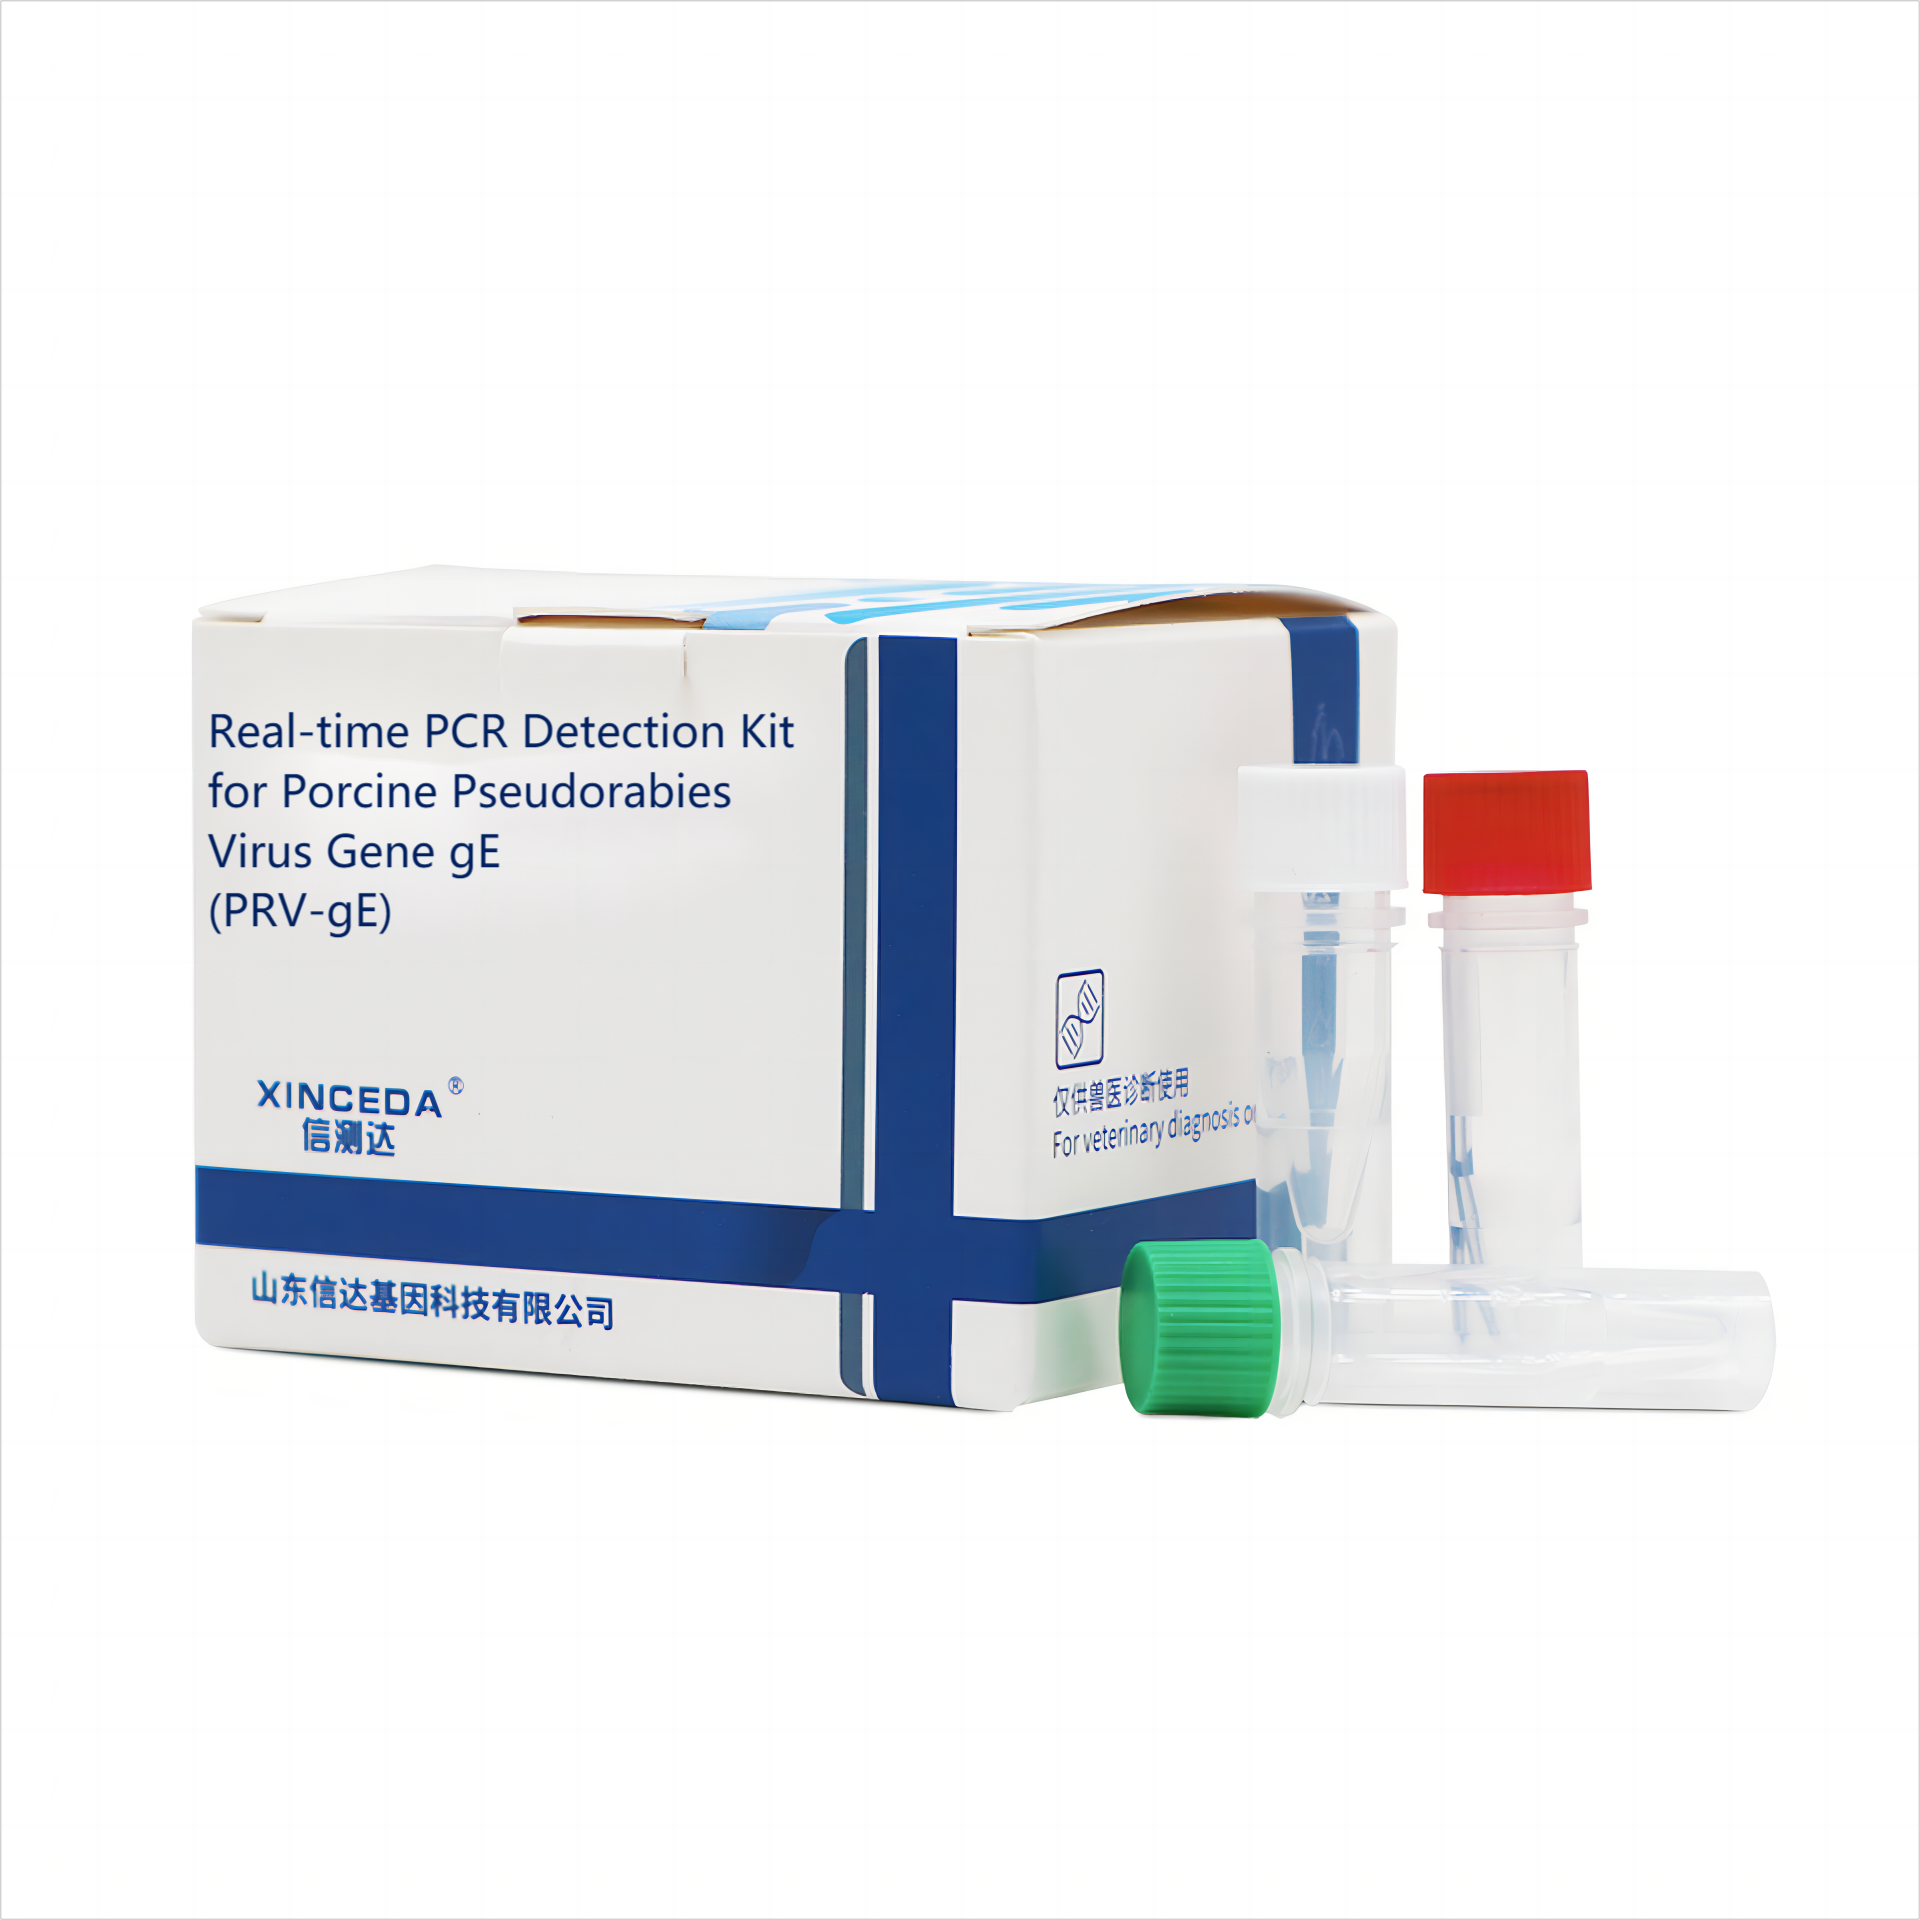 PCR Testing for African Swine Fever (ASF): Importance and Process